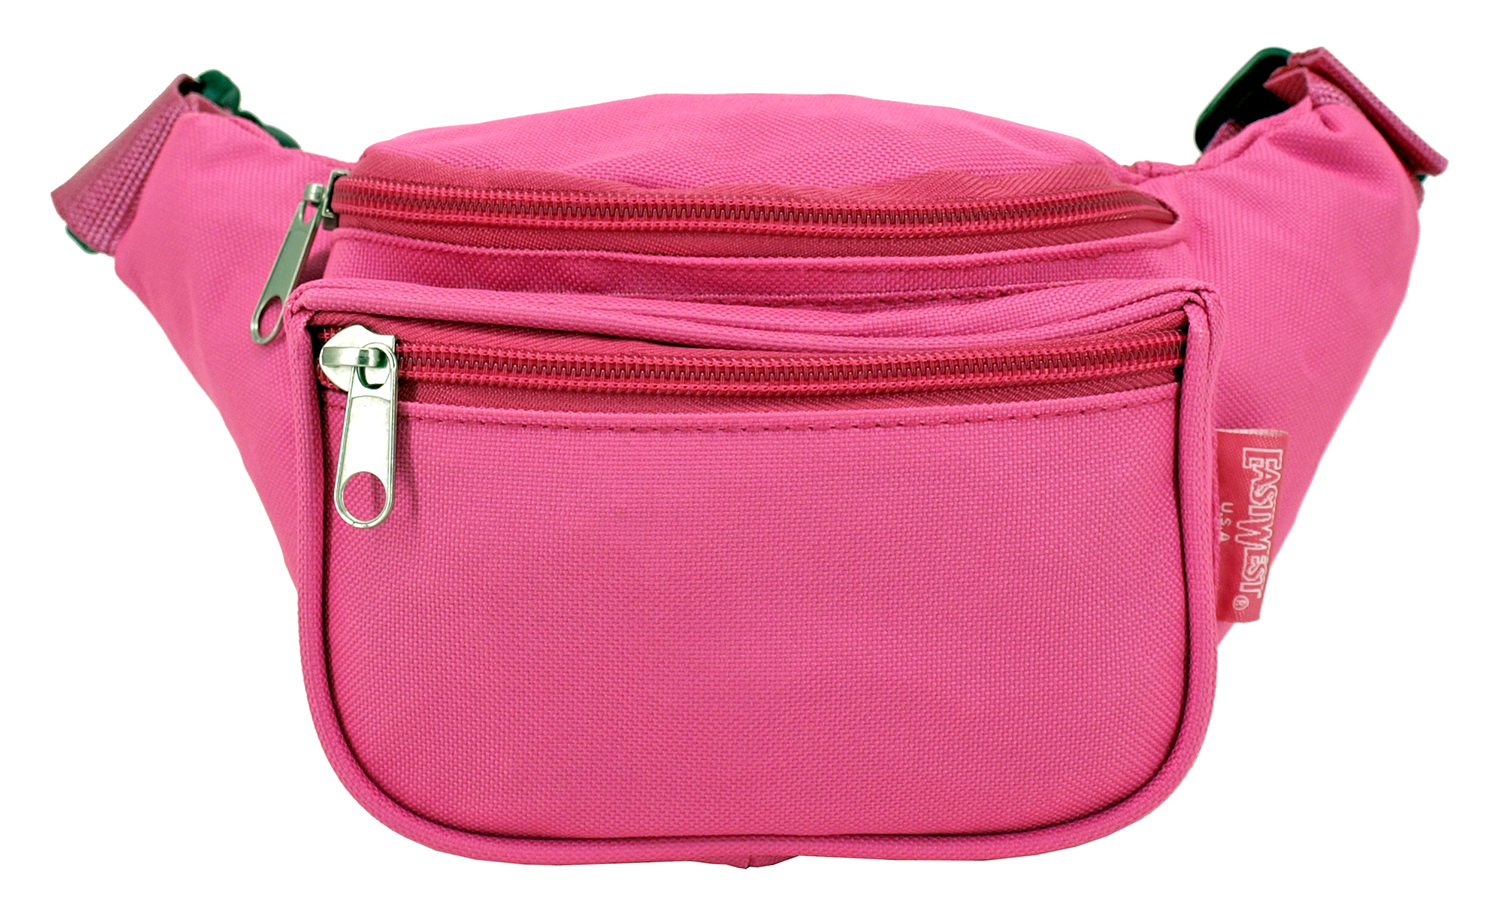 Medium Daily Fanny Pack with Pouch - Hot Pink